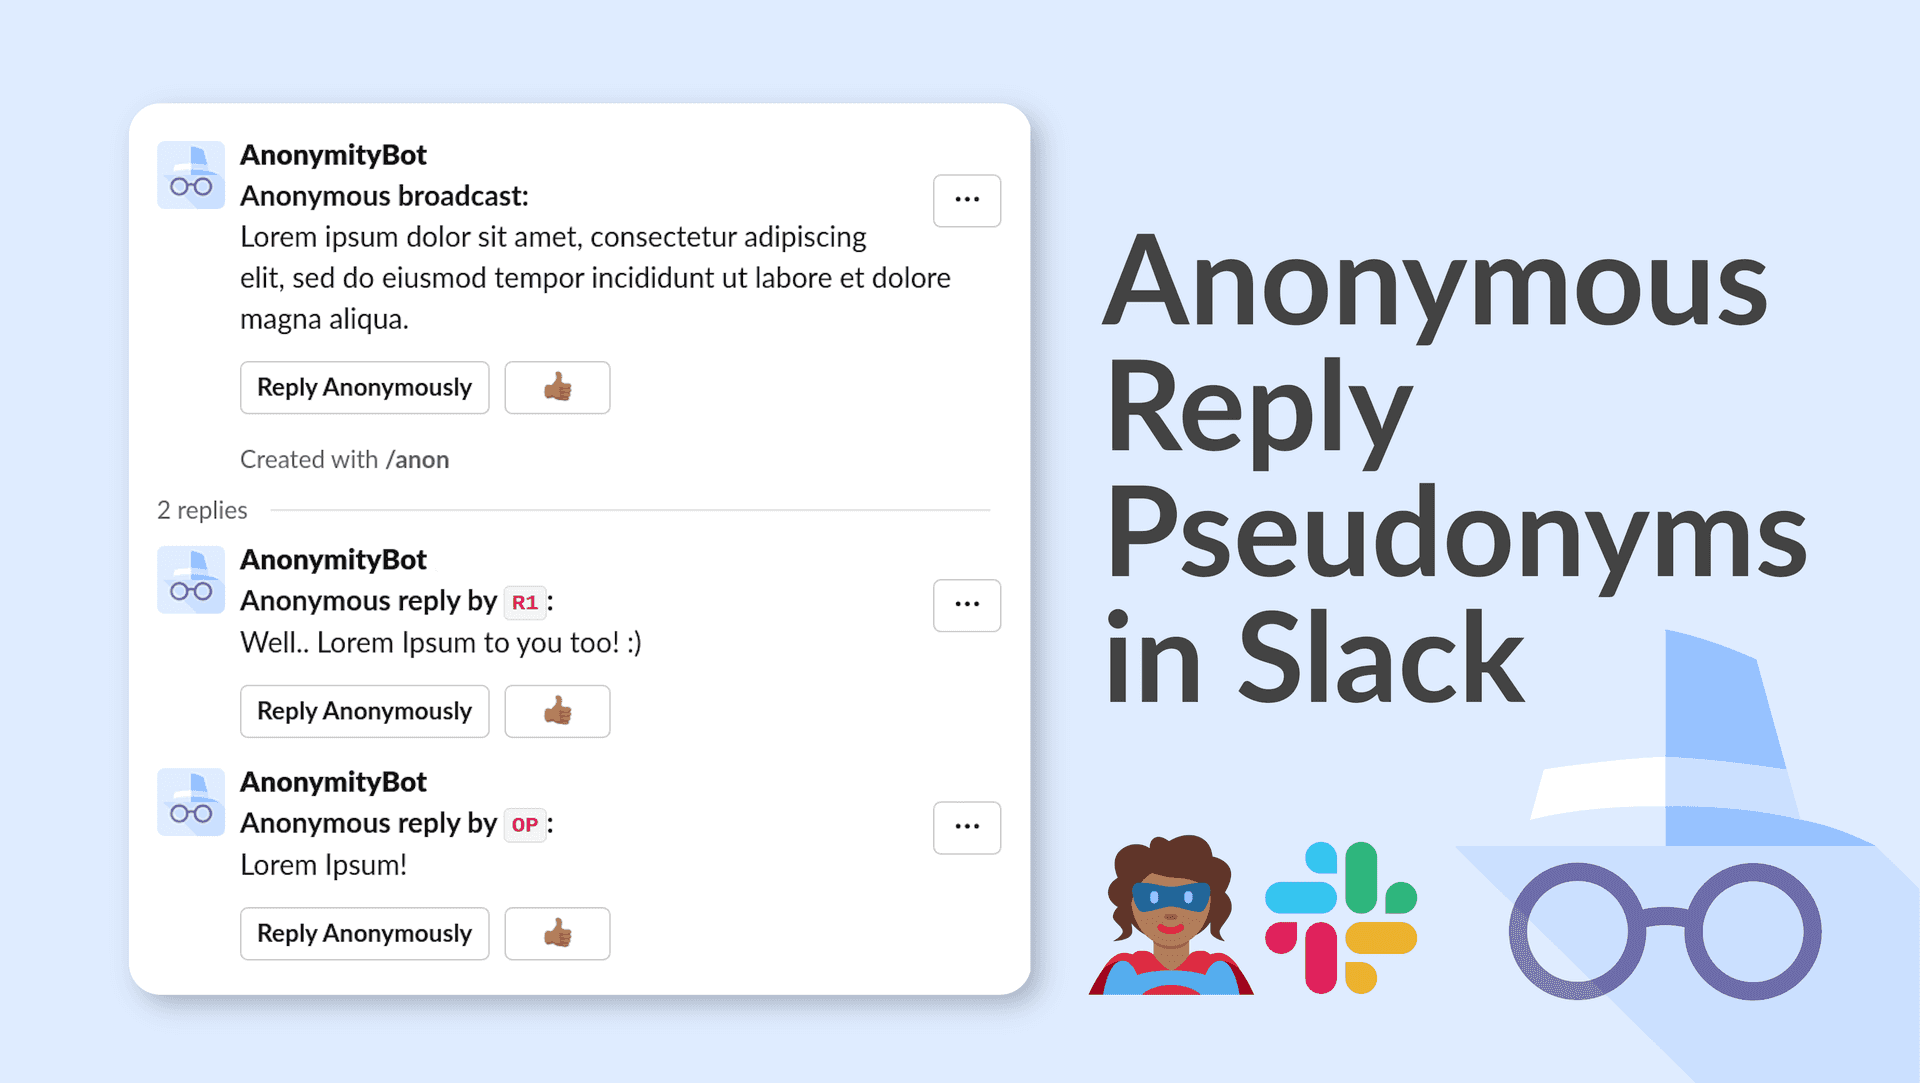 Anonymous Reply Pseudonyms in Slack